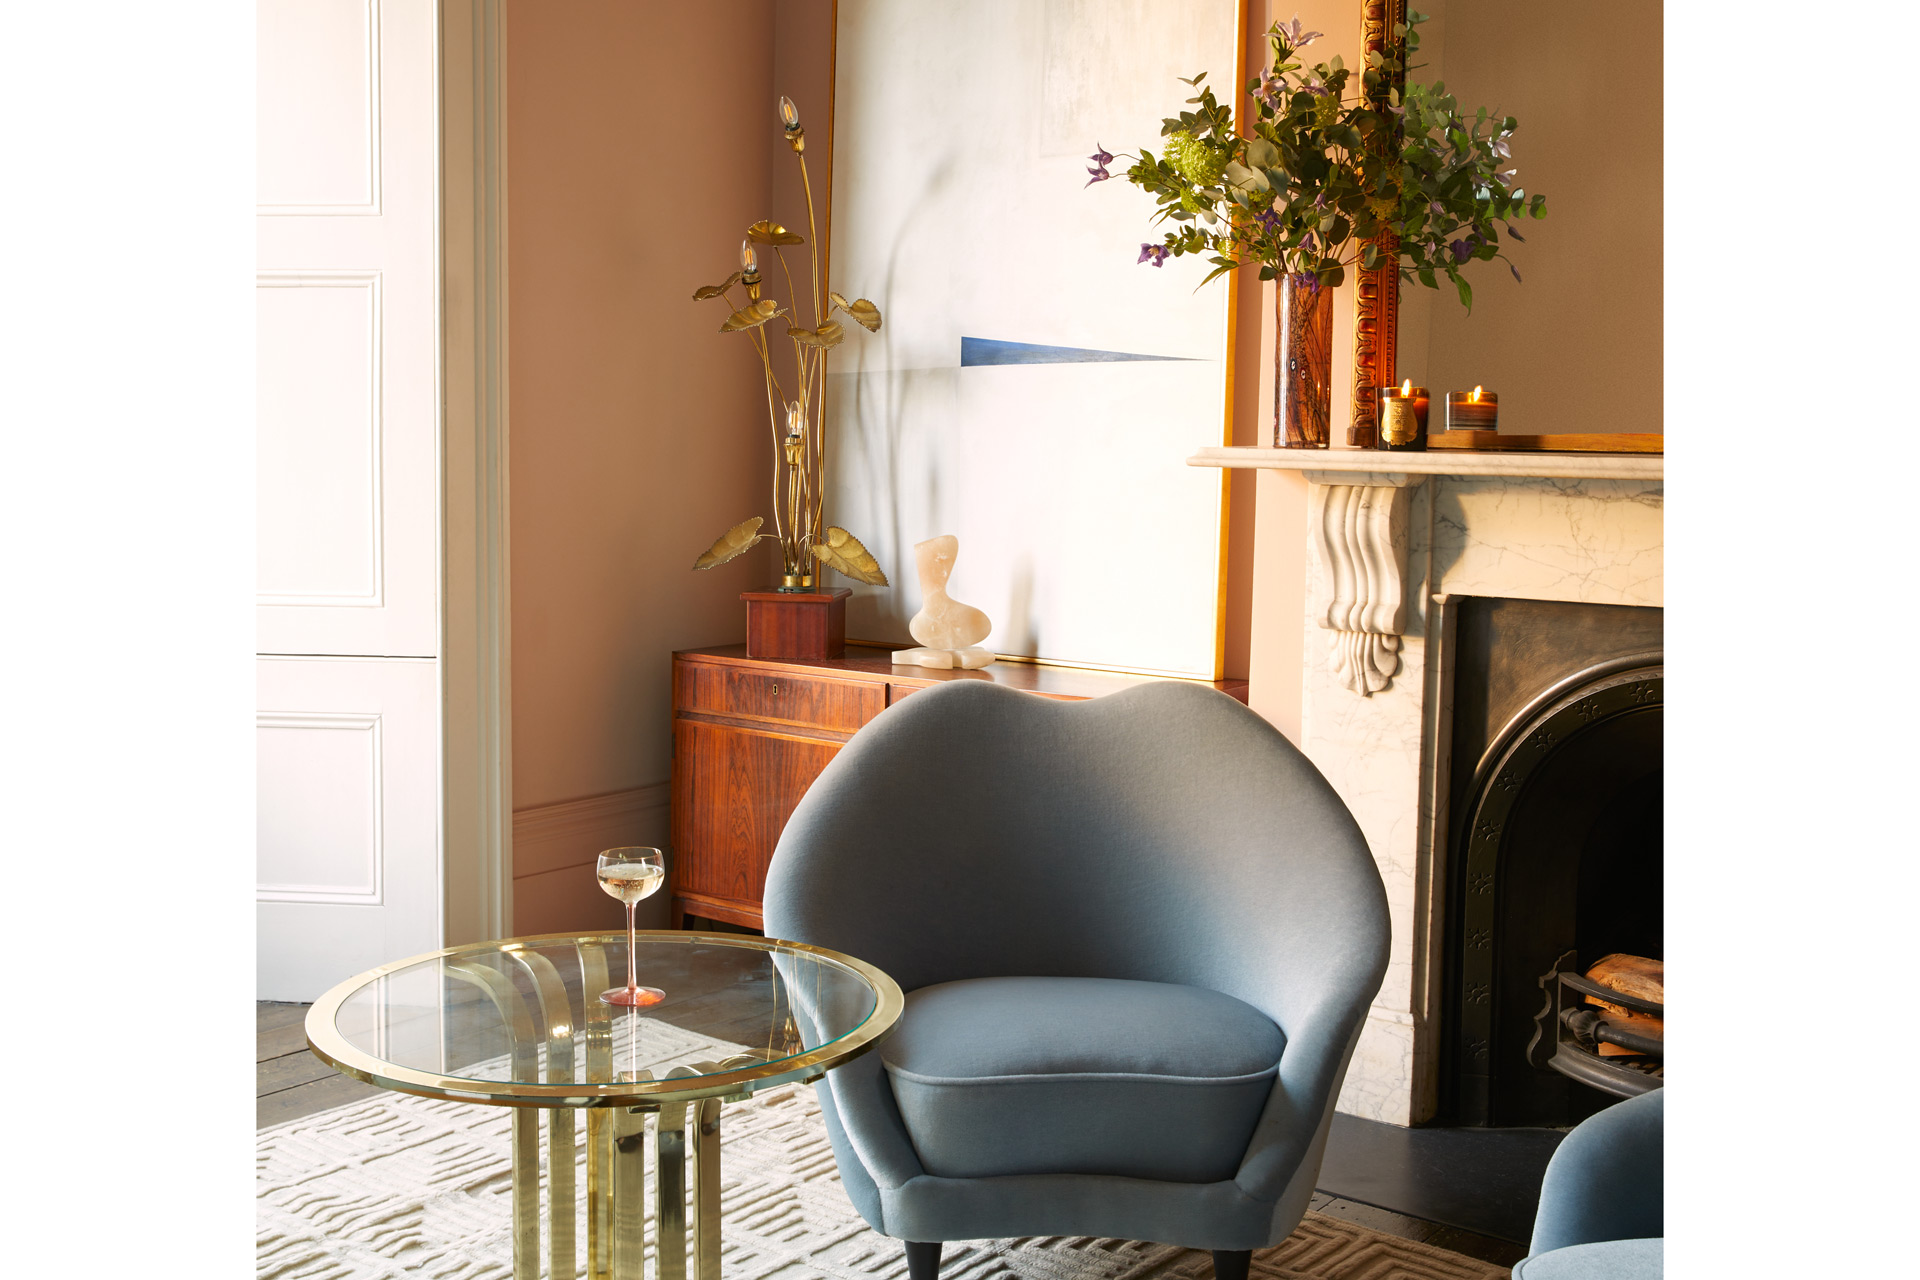 Living room with dusty blue chair, glass side table and mantlepiece with vase of flowers